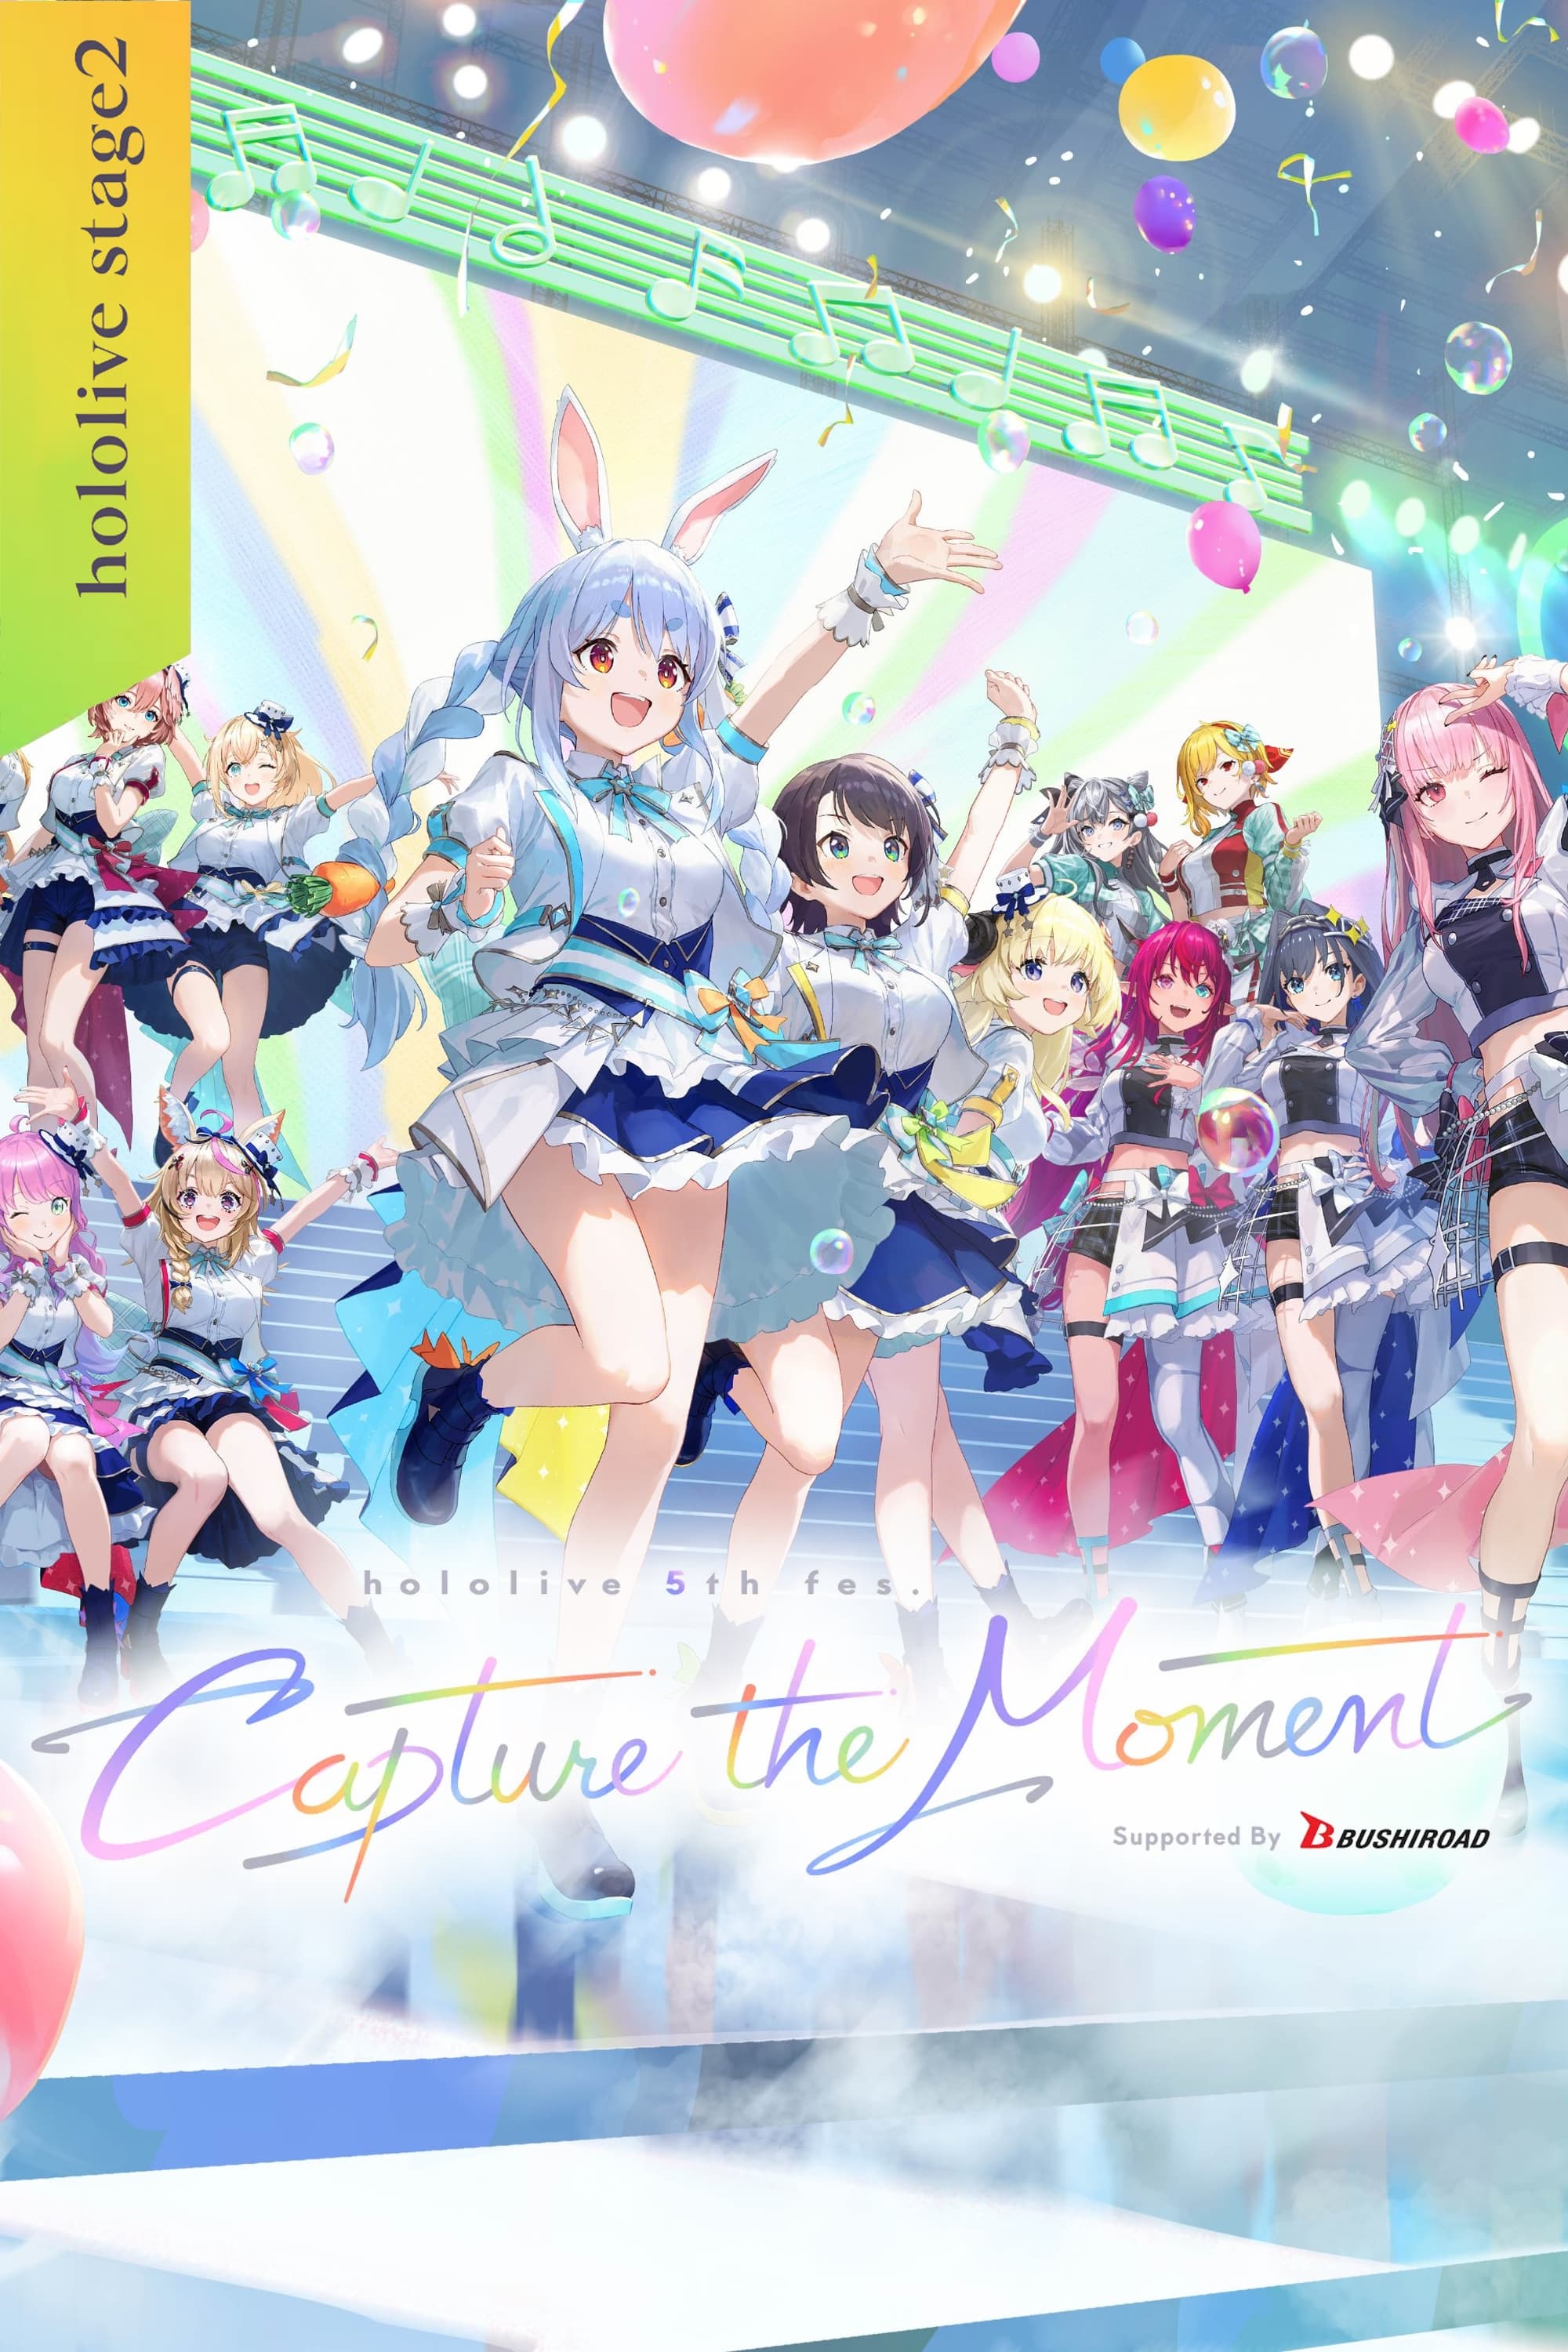 Hololive 5th fes. Capture the Moment Day 1 Stage 2